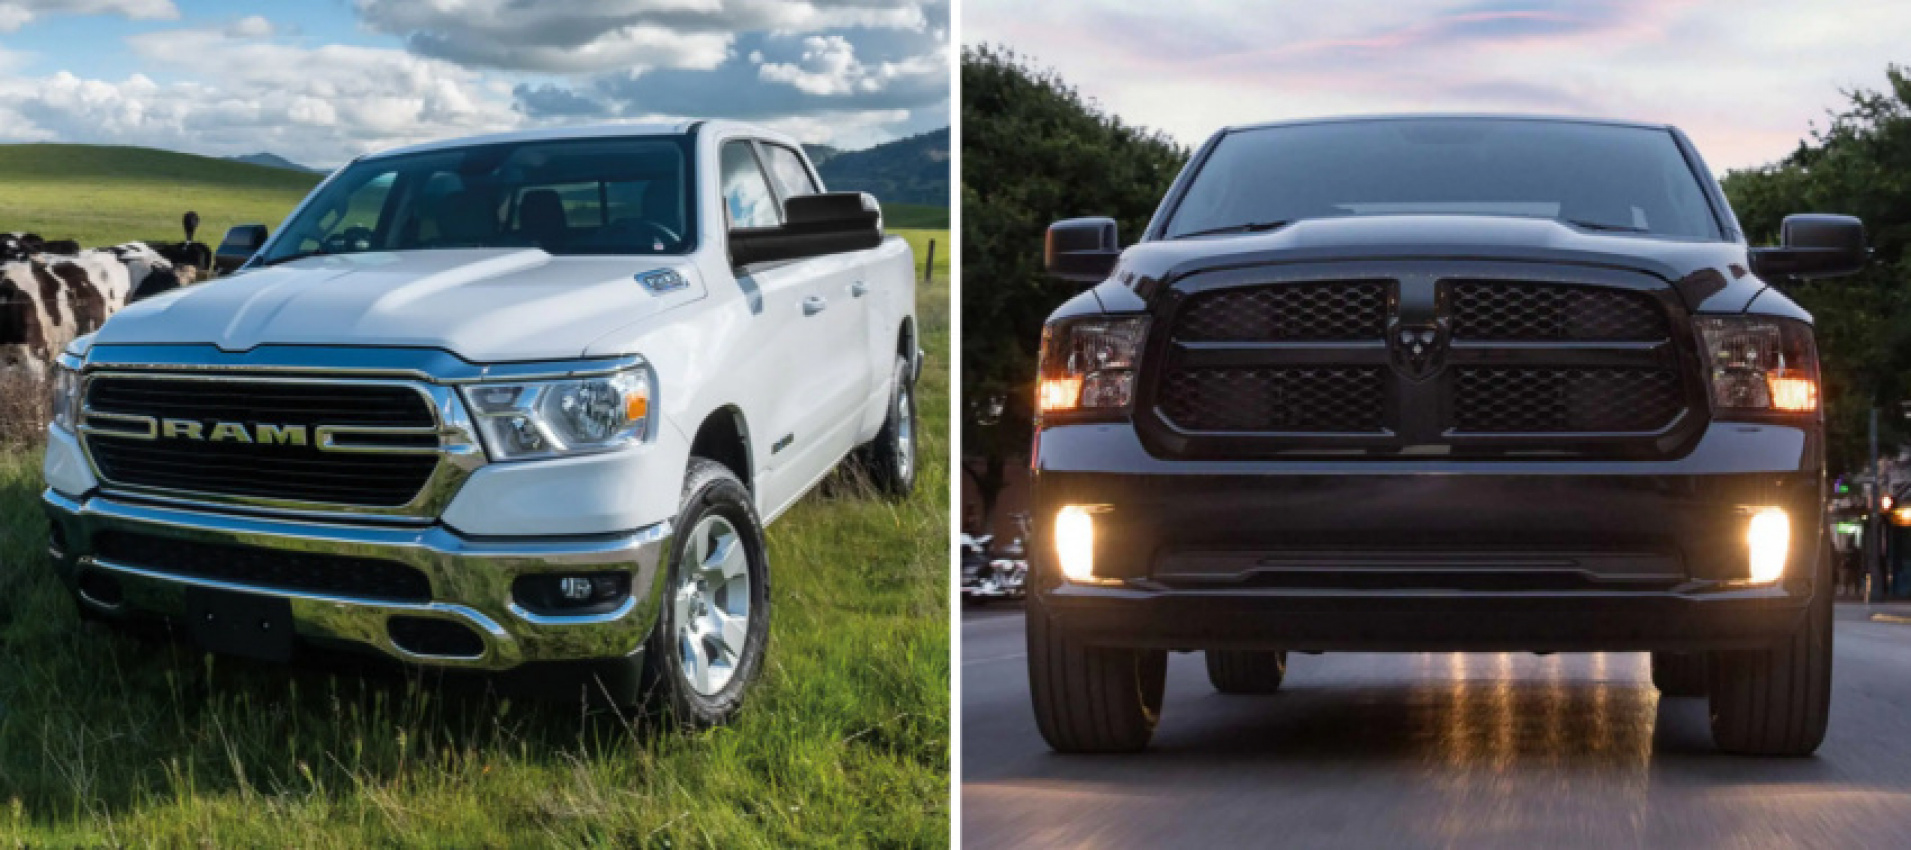 android, autos, cars, ram, ram 1500 classic, android, 2022 ram 1500 vs. 2022 ram 1500 classic: the modern and vintage ram truck tussle